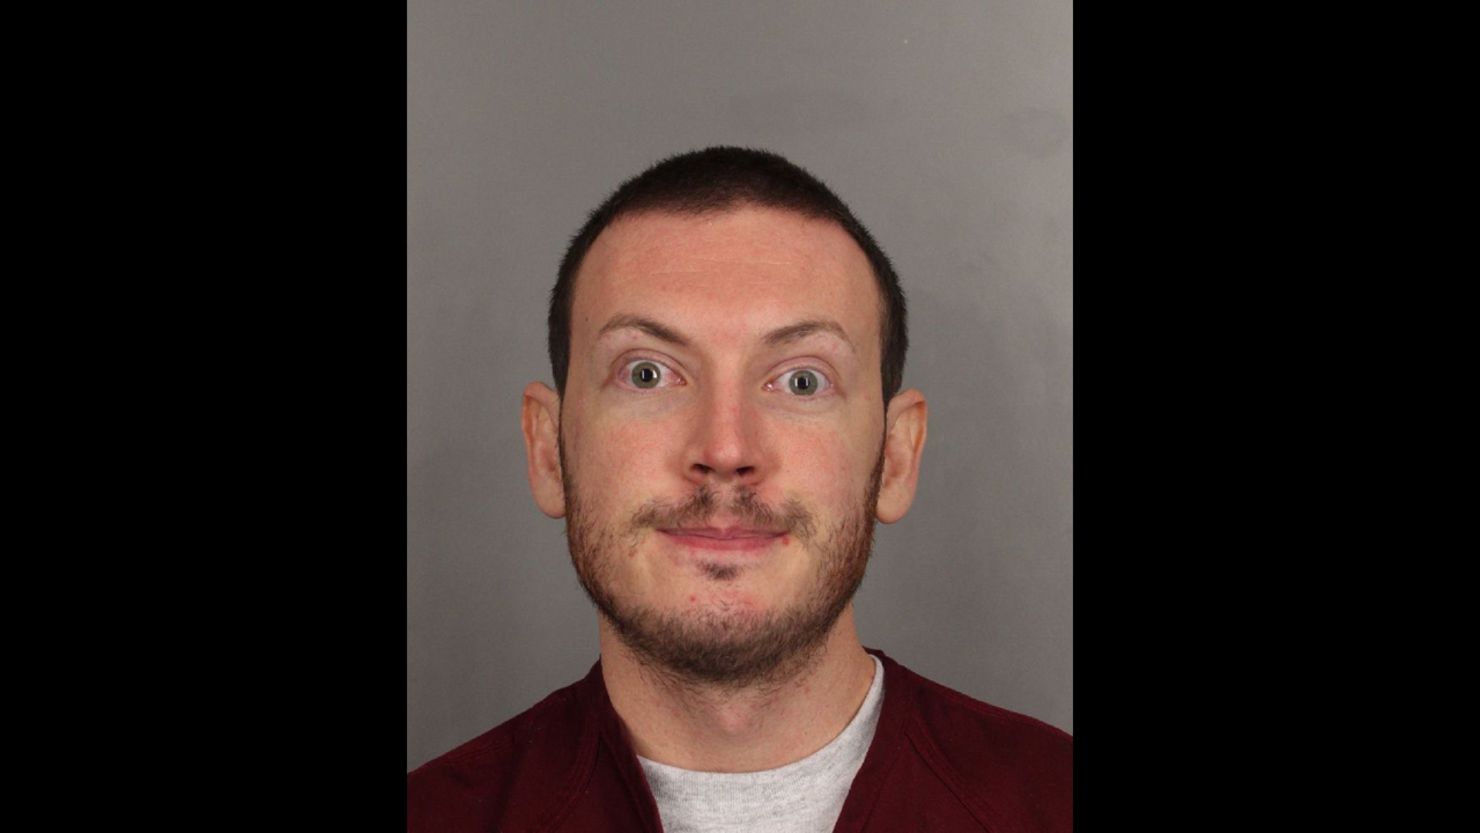 James Holmes is accused of killing 12 people in a shooting rampage at a Colorado movie theater.